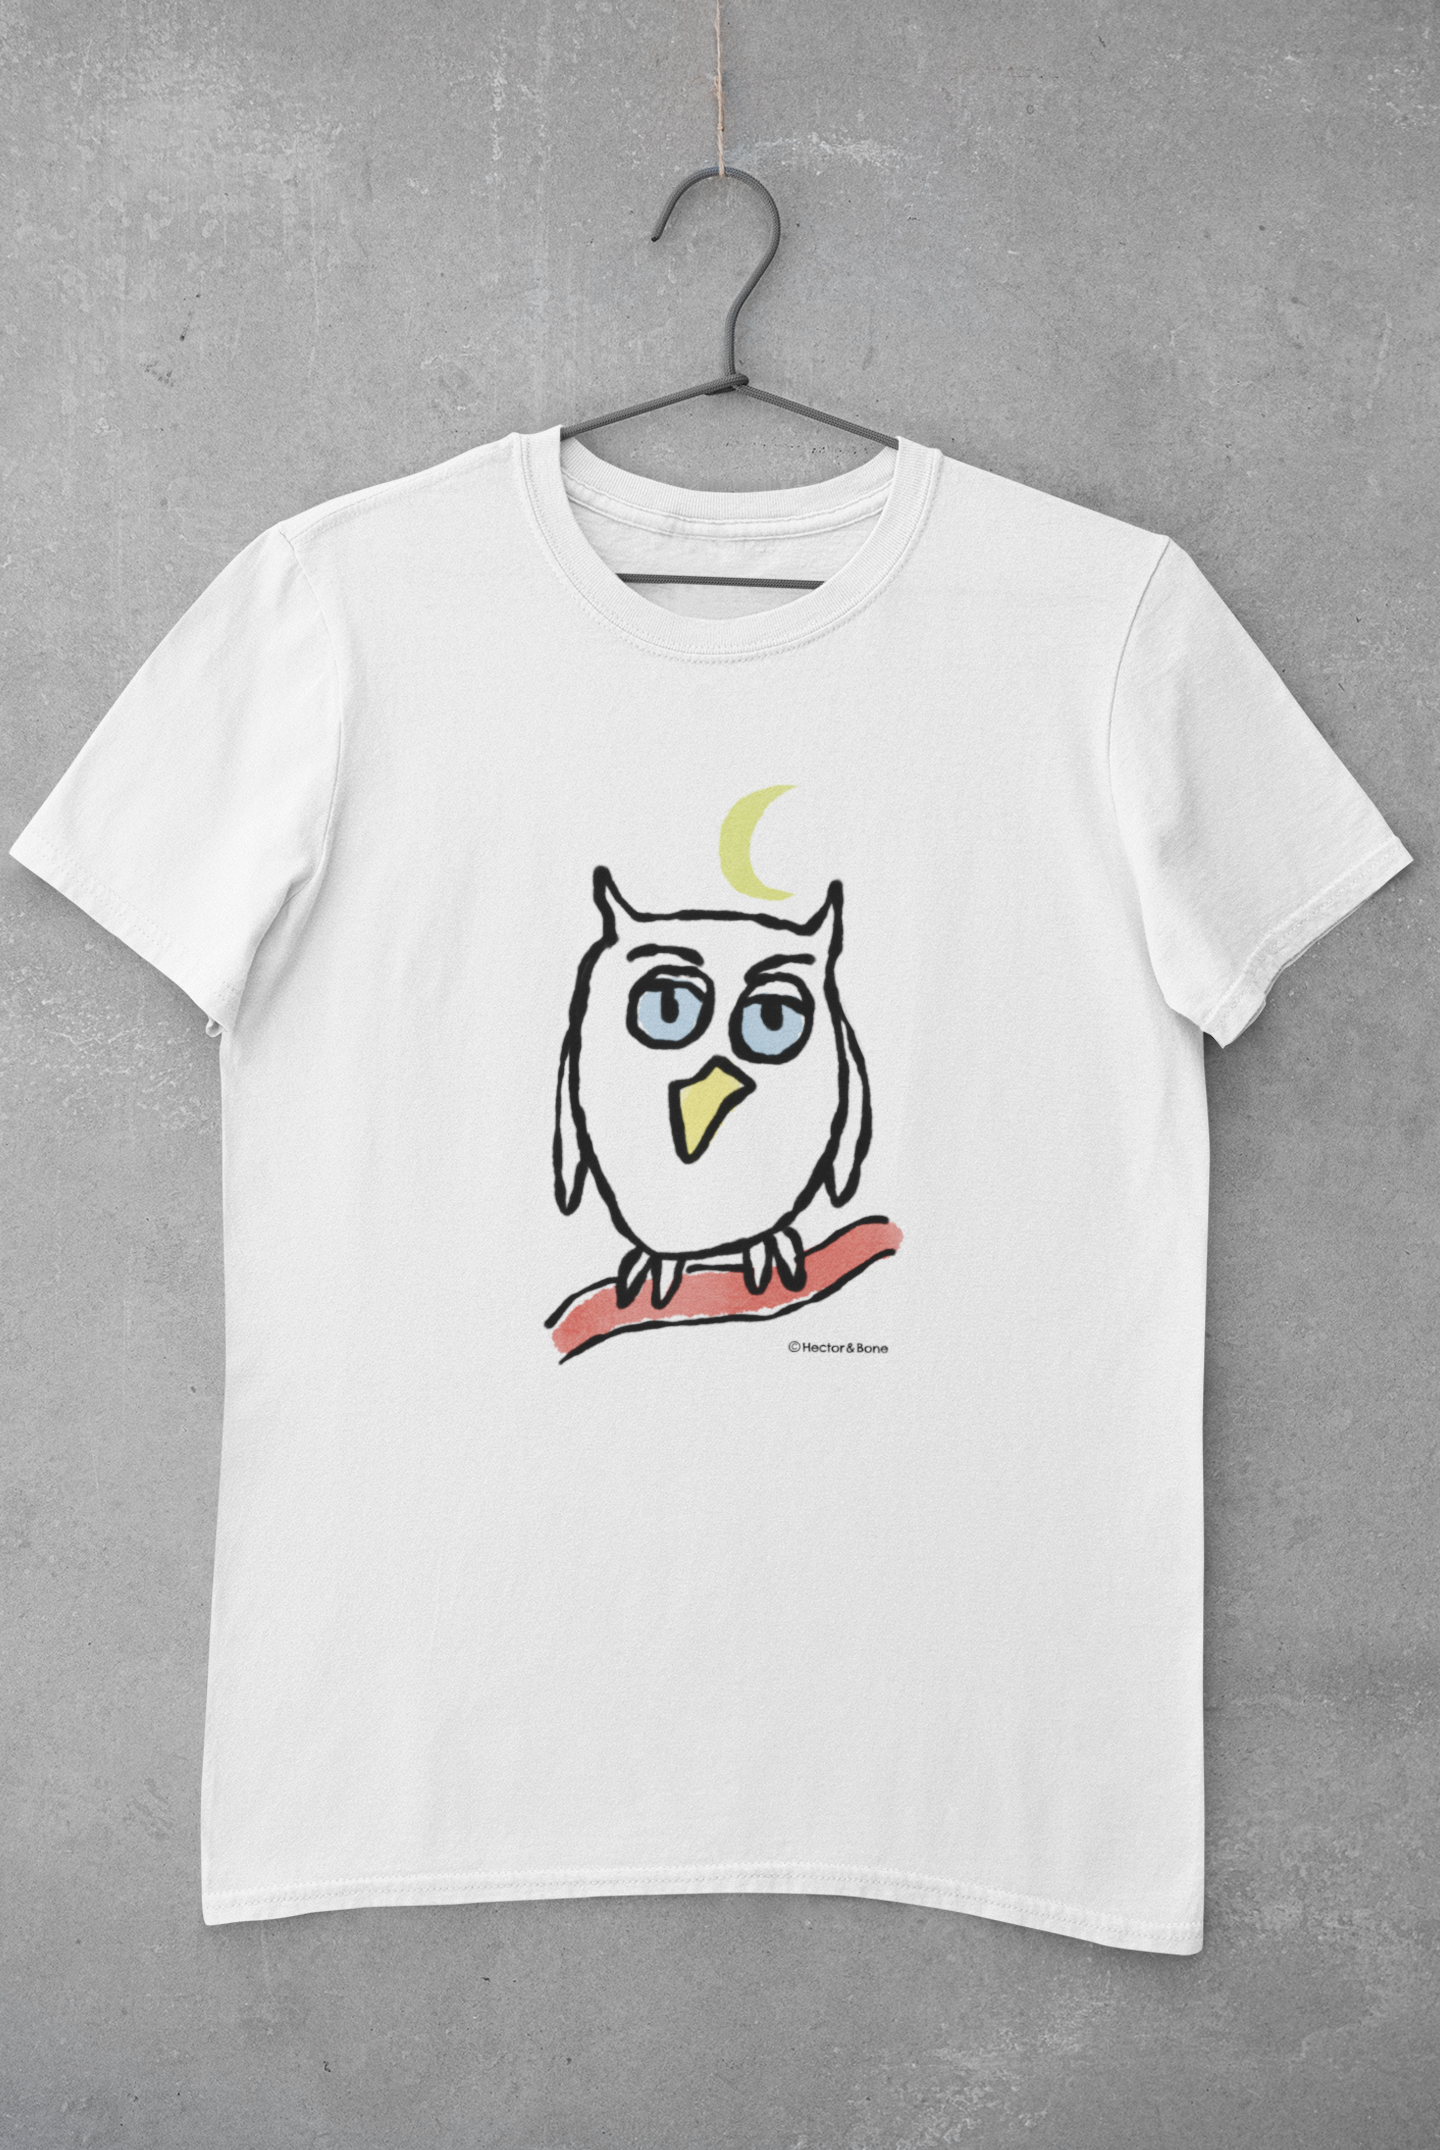 Night Owl T-shirt - Classic white vegan cute illustrated Owl T-shirts by Hector and Bone